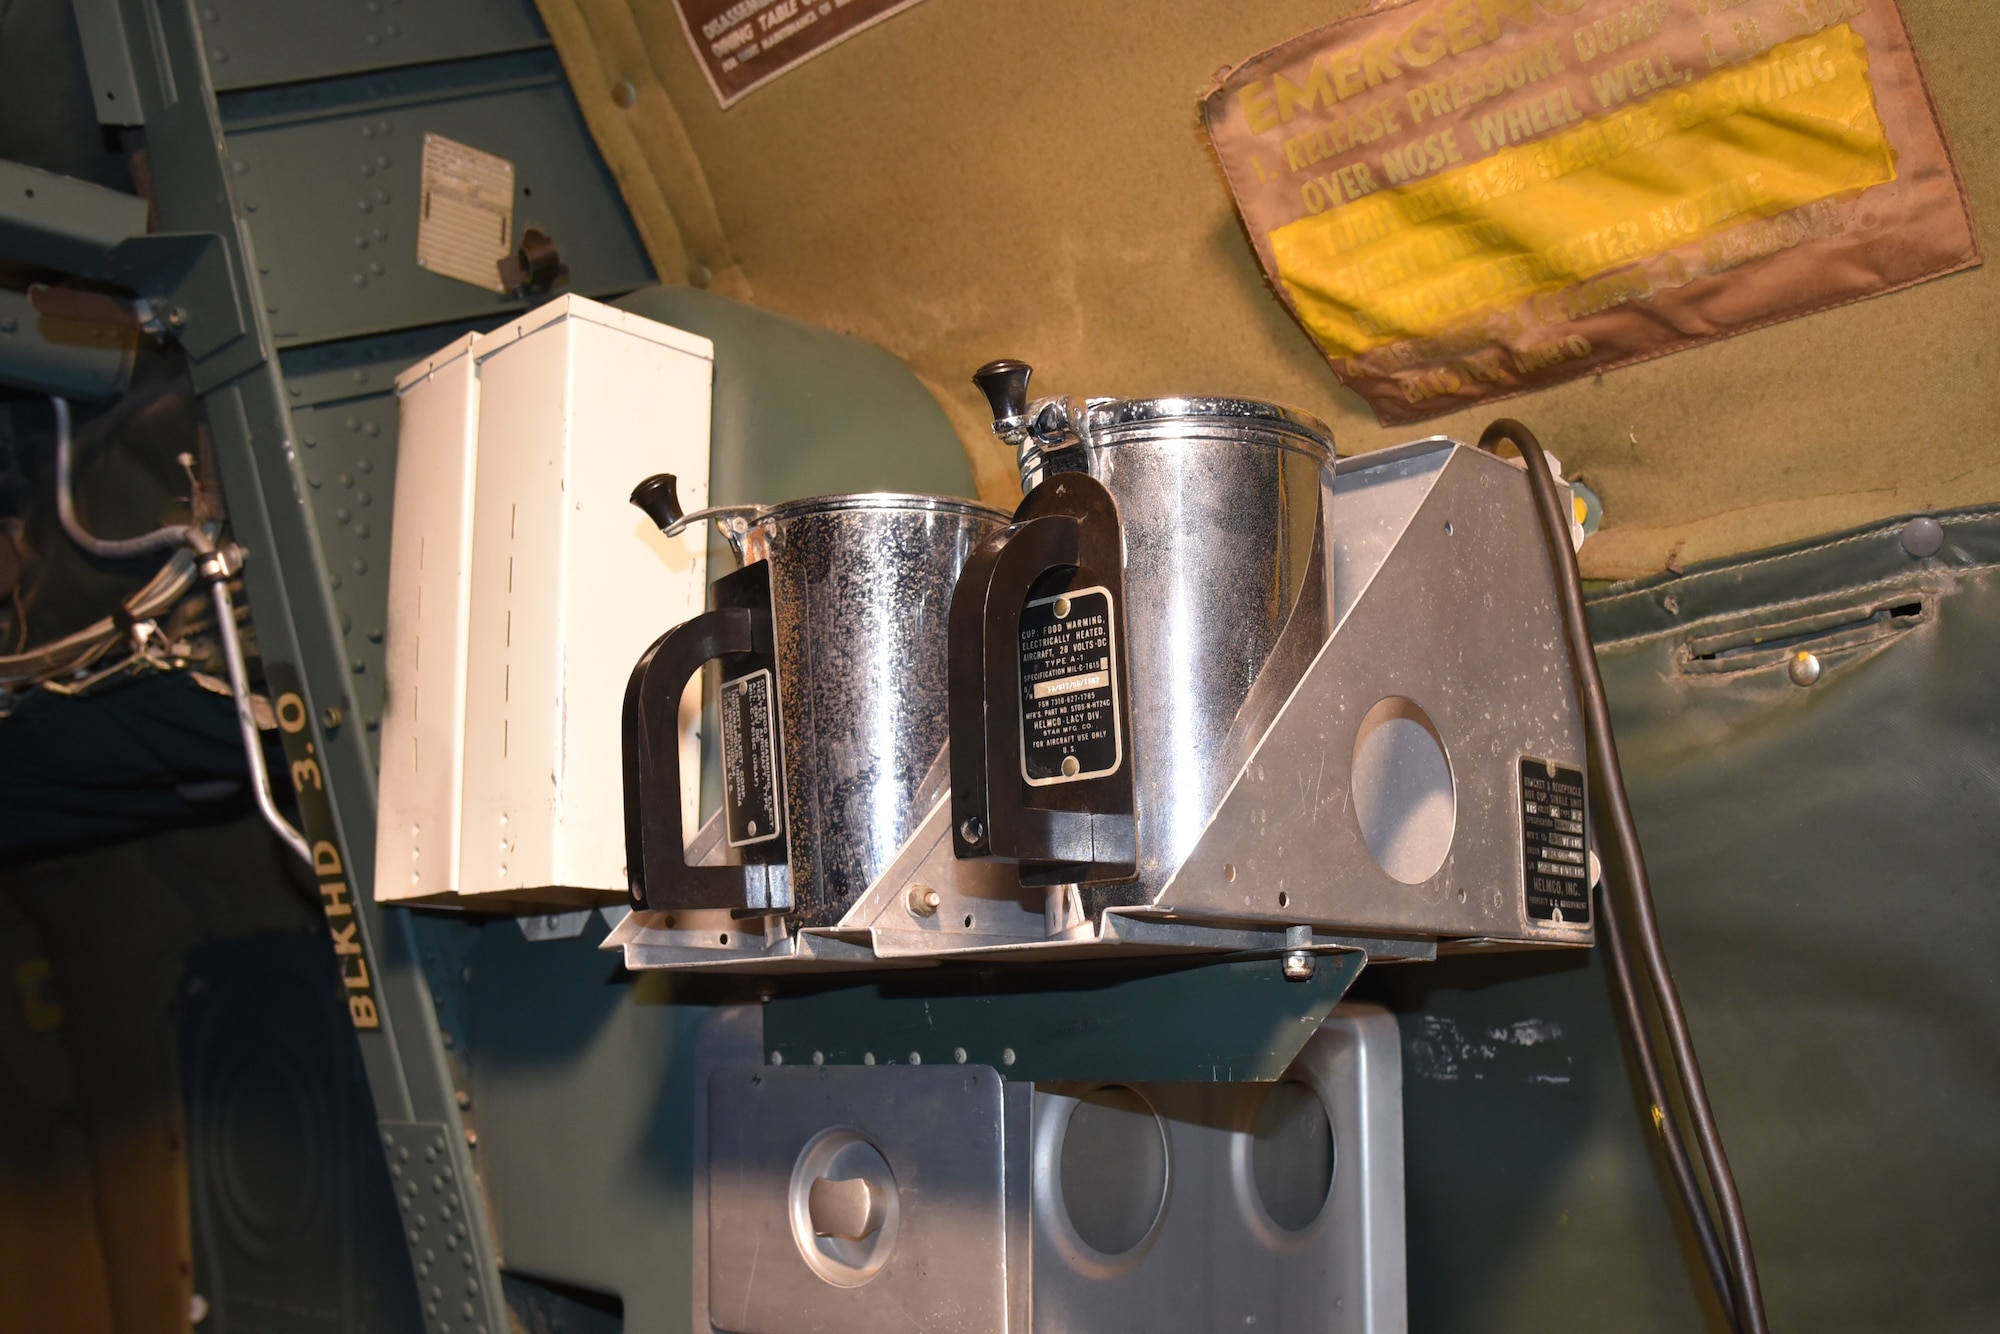 DAYTON, Ohio - Convair B-36J Peacemaker-coffee makers near the Radio Operator's Station at the National Museum of the U.S. Air Force. (U.S. Air Force photo by Ken LaRock)